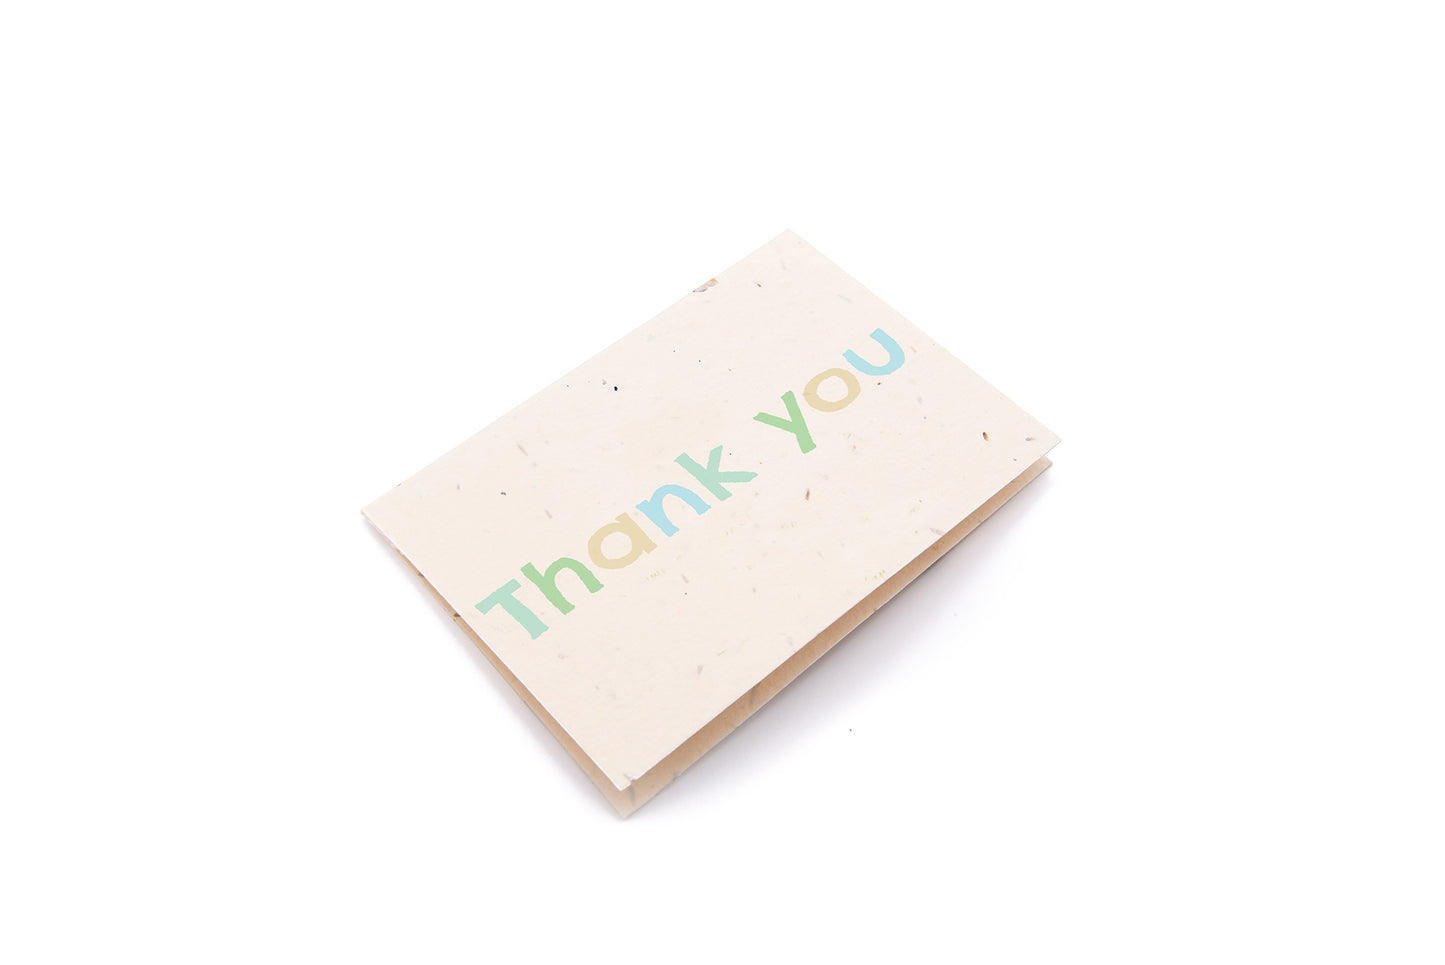 Pastel thank you card | Seed paper thank you card